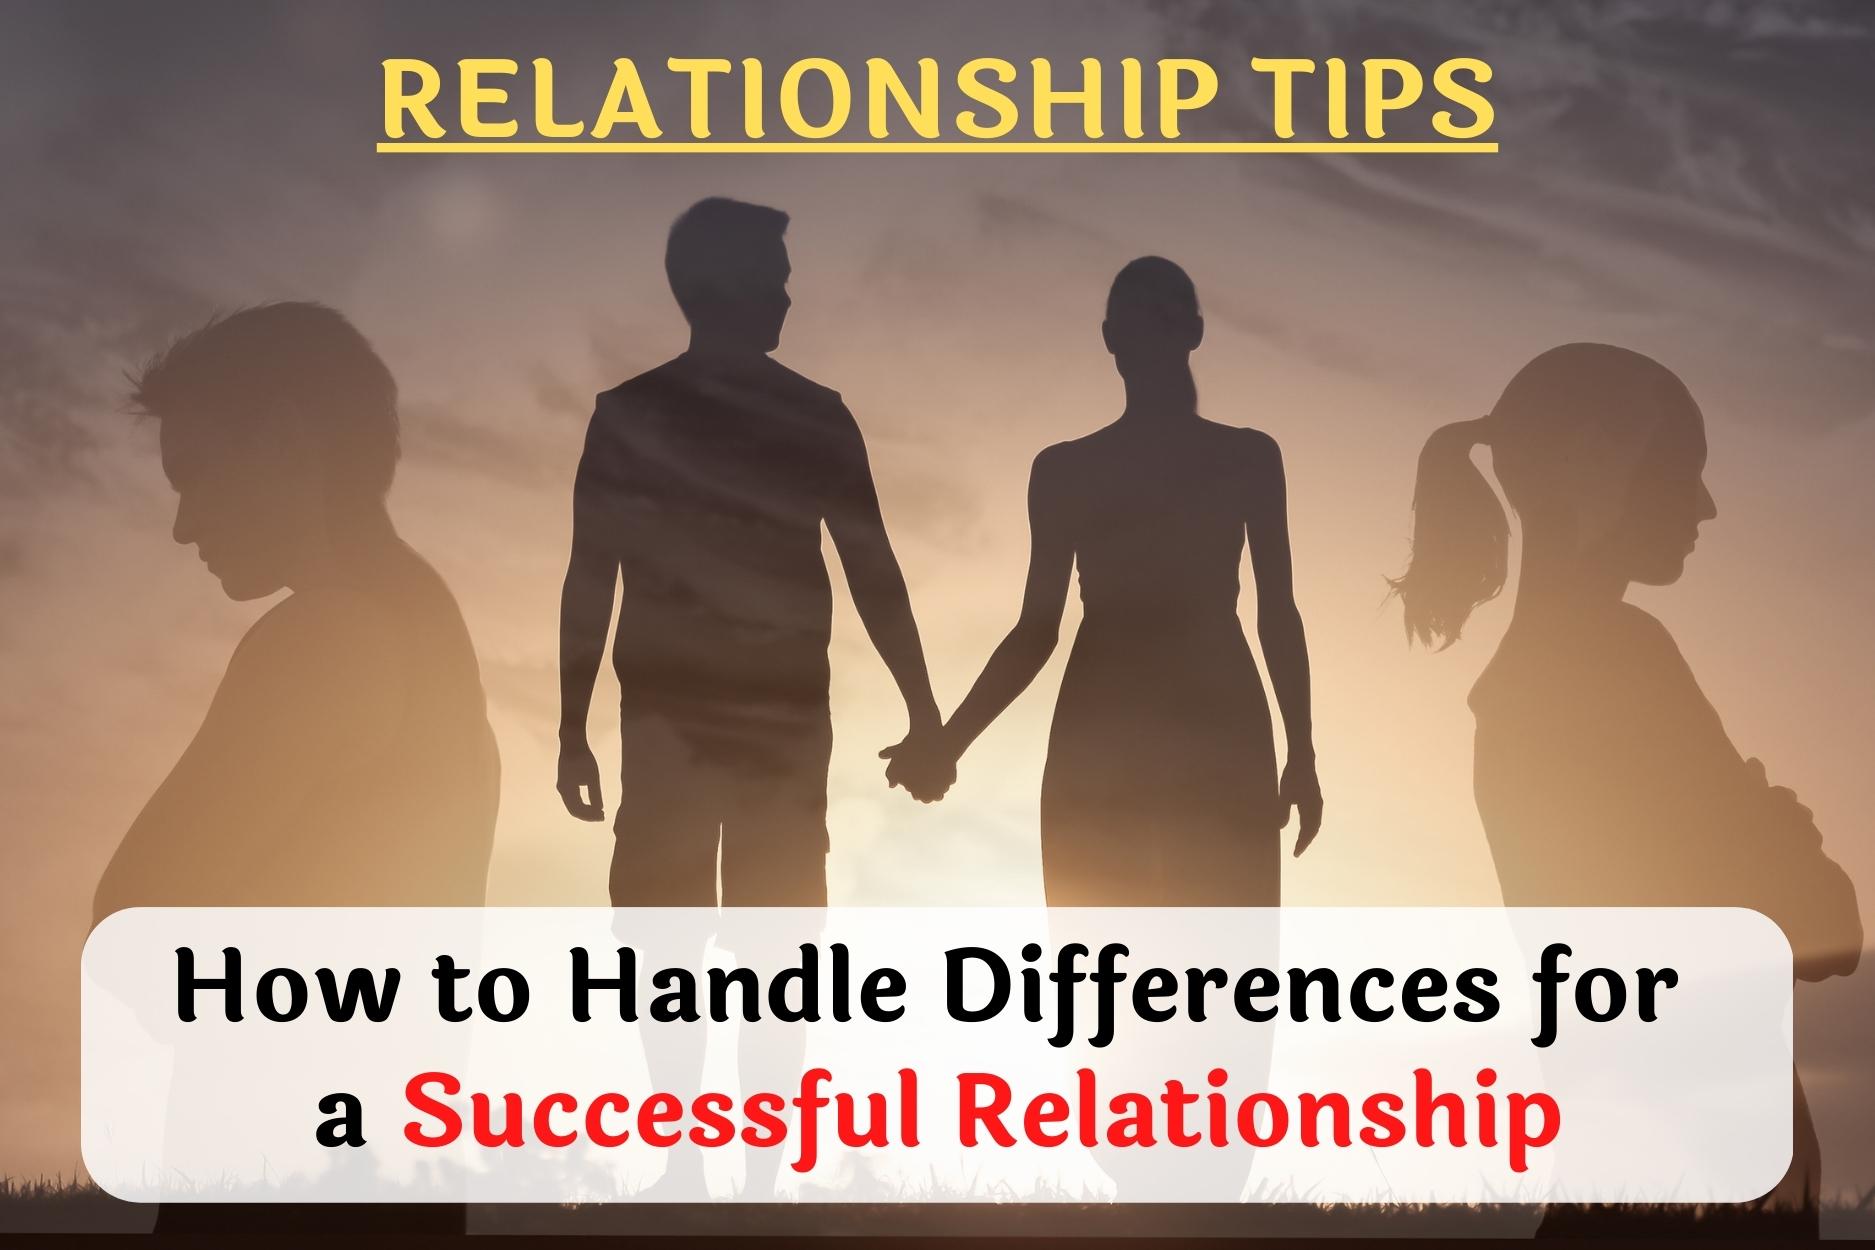 Relationship Tips: How to Handle Differences for a Successful Relationship